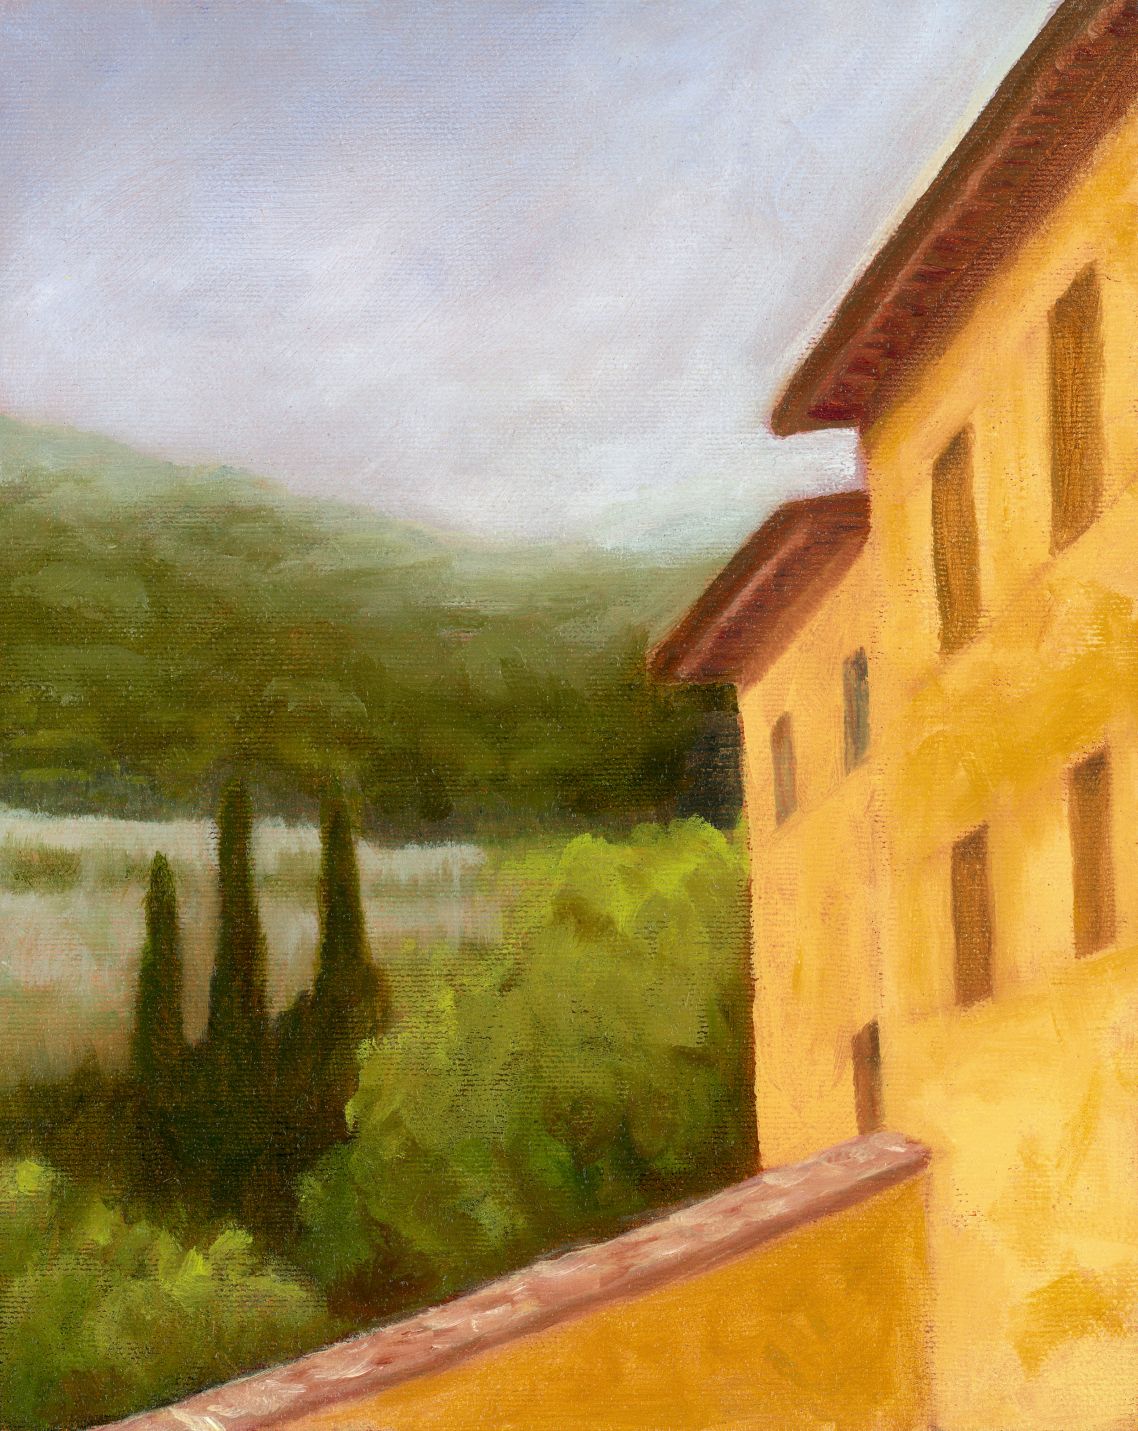 Taste of Tuscany - Original oil painting by Isabelle Griesmyer